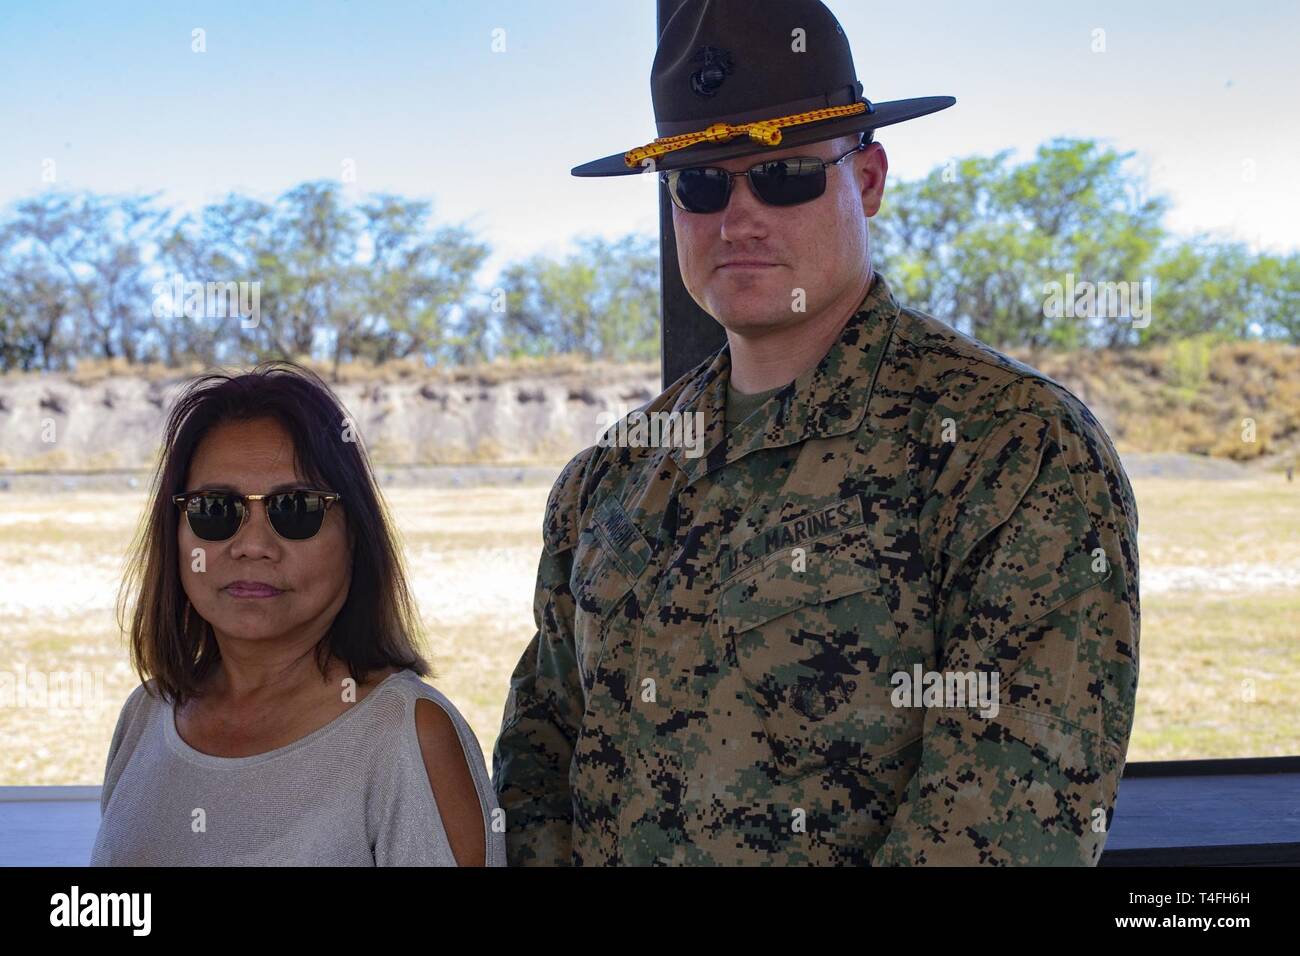 U.S. Marine Corps Chief Warrant Officer 2 Jeffrey Wright, right, officer in charge of Pu’uloa Range Training Facility, takes a photo with Rep. Rida Arakawa, left, of Hawaii's Ewa District, Marine Corps Base Hawaii (MCBH), Apr. 8, 2019. During the visit, MCBH leadership discussed and showcased Marine Corps marksmanship training, community partnerships, and the positive economic impact from MCBH facilities and service members. Stock Photo